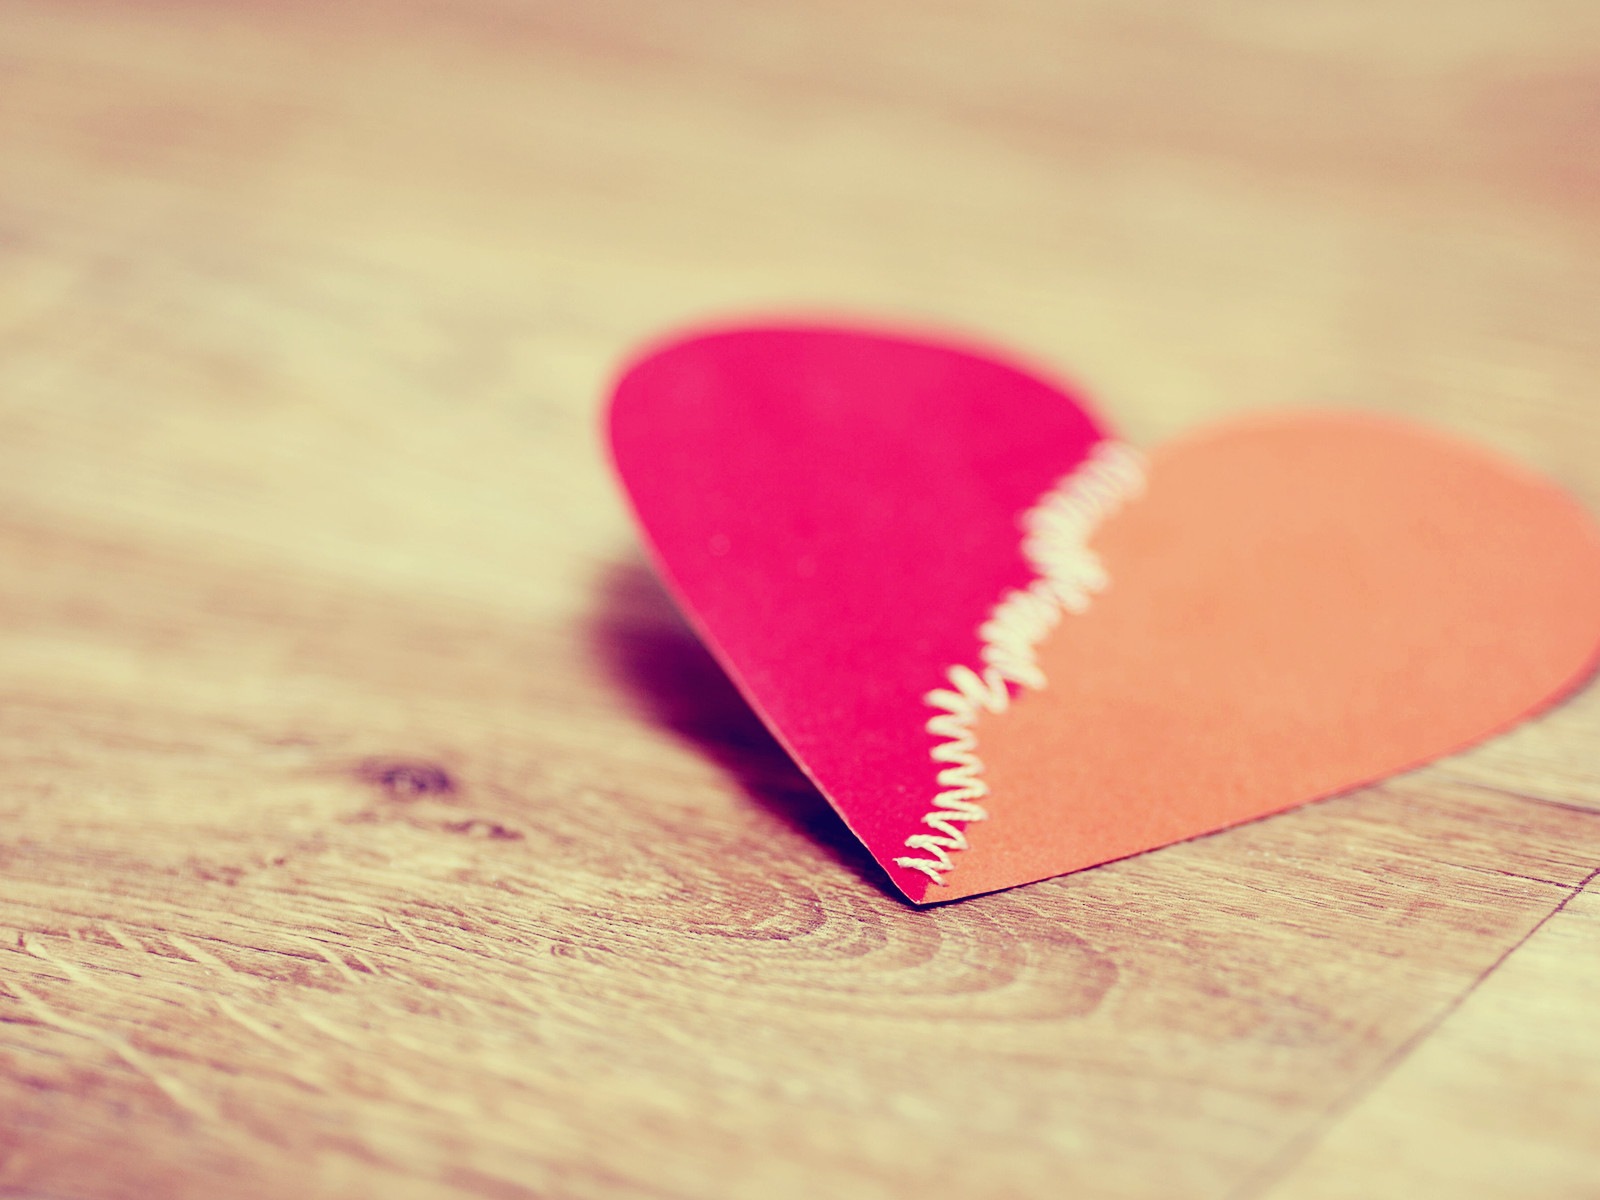 The theme of love, creative heart-shaped HD wallpapers #5 - 1600x1200